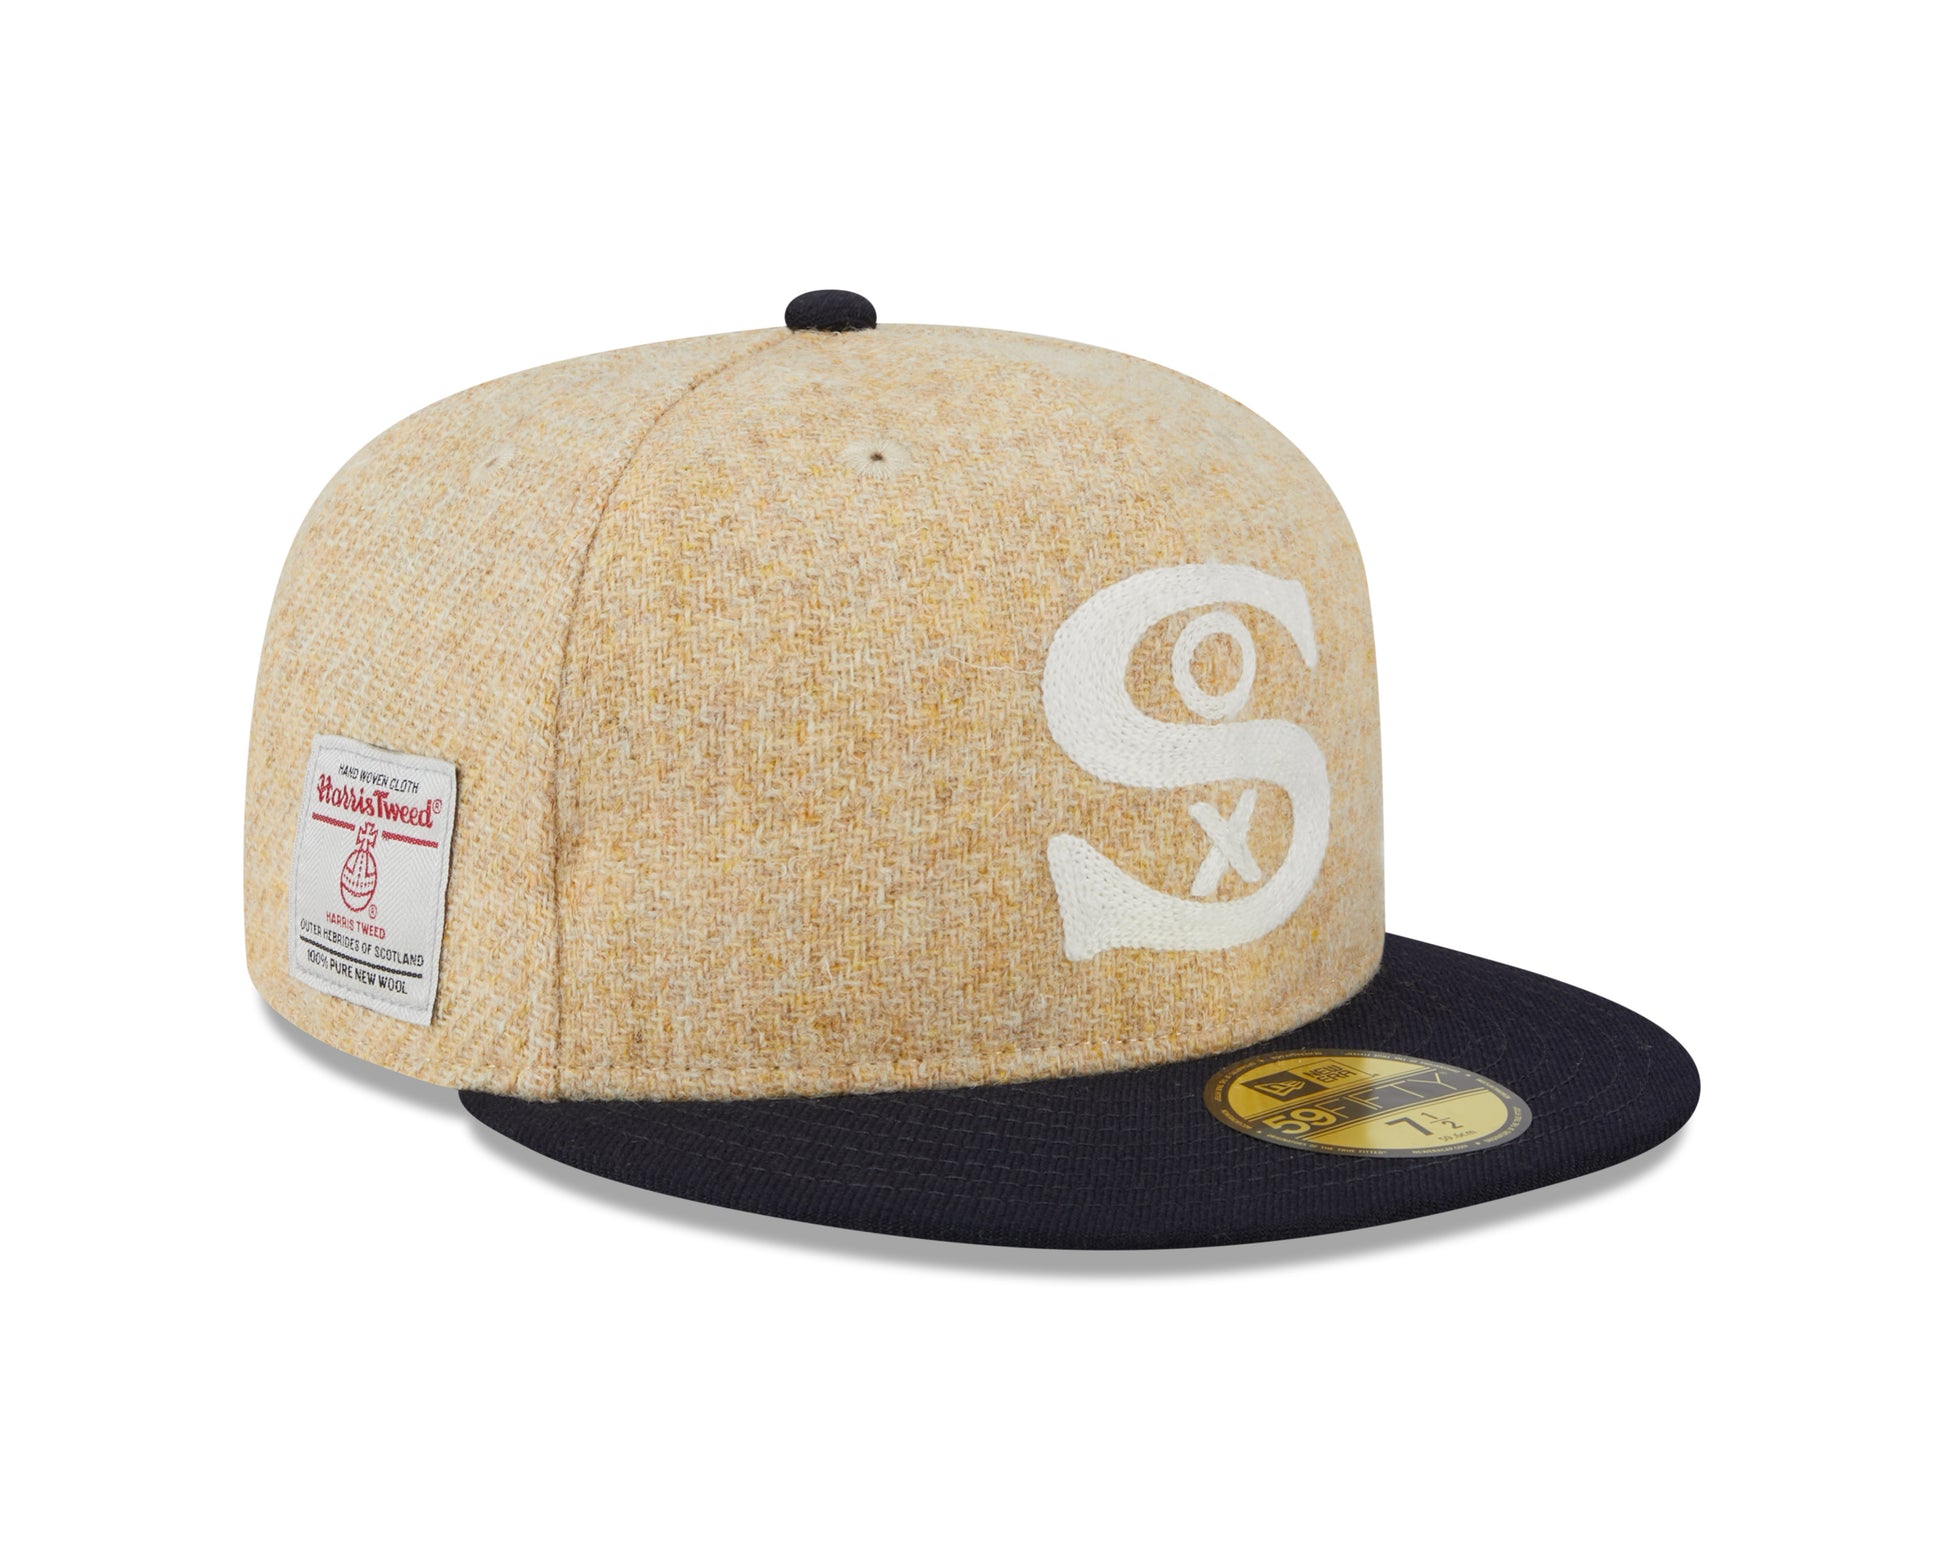 New Era - 59Fifty Fitted Cap - HARRIS TWEED - Chicago White Sox - XTN - Headz Up 